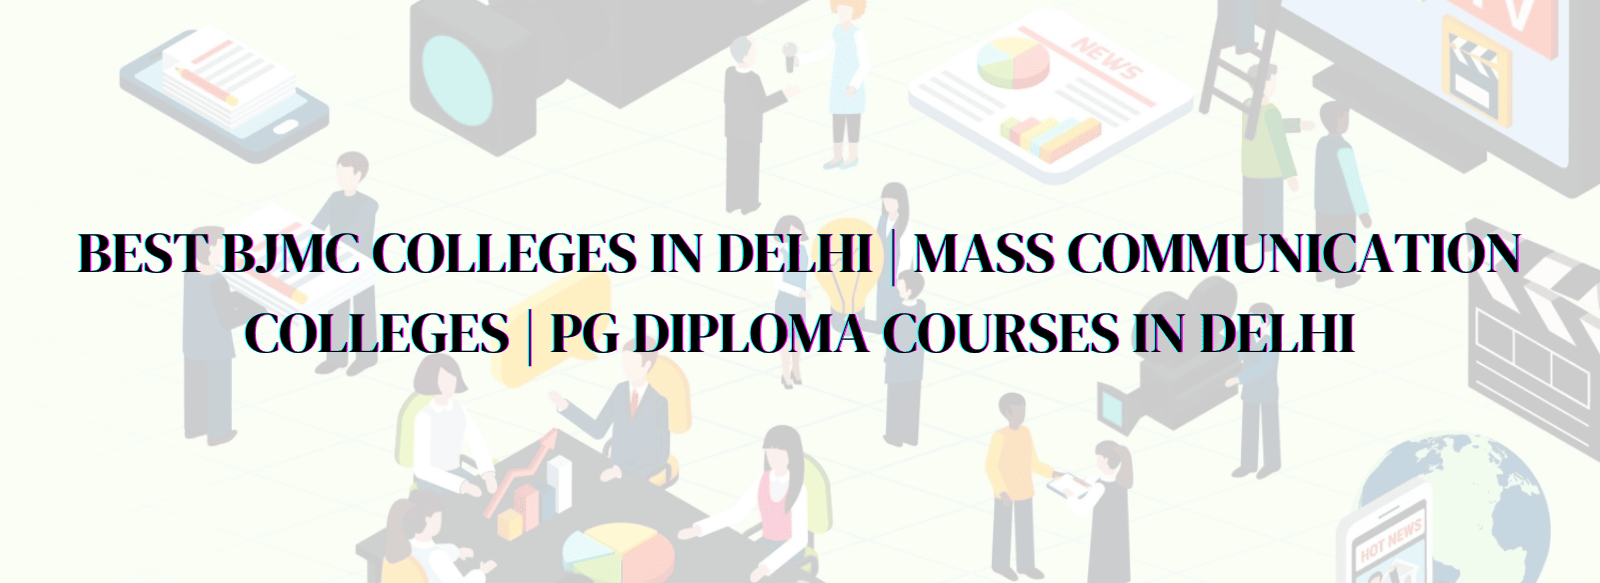 Best BJMC Colleges in Delhi | Mass Communication Colleges | PG Diploma Courses in Delhi